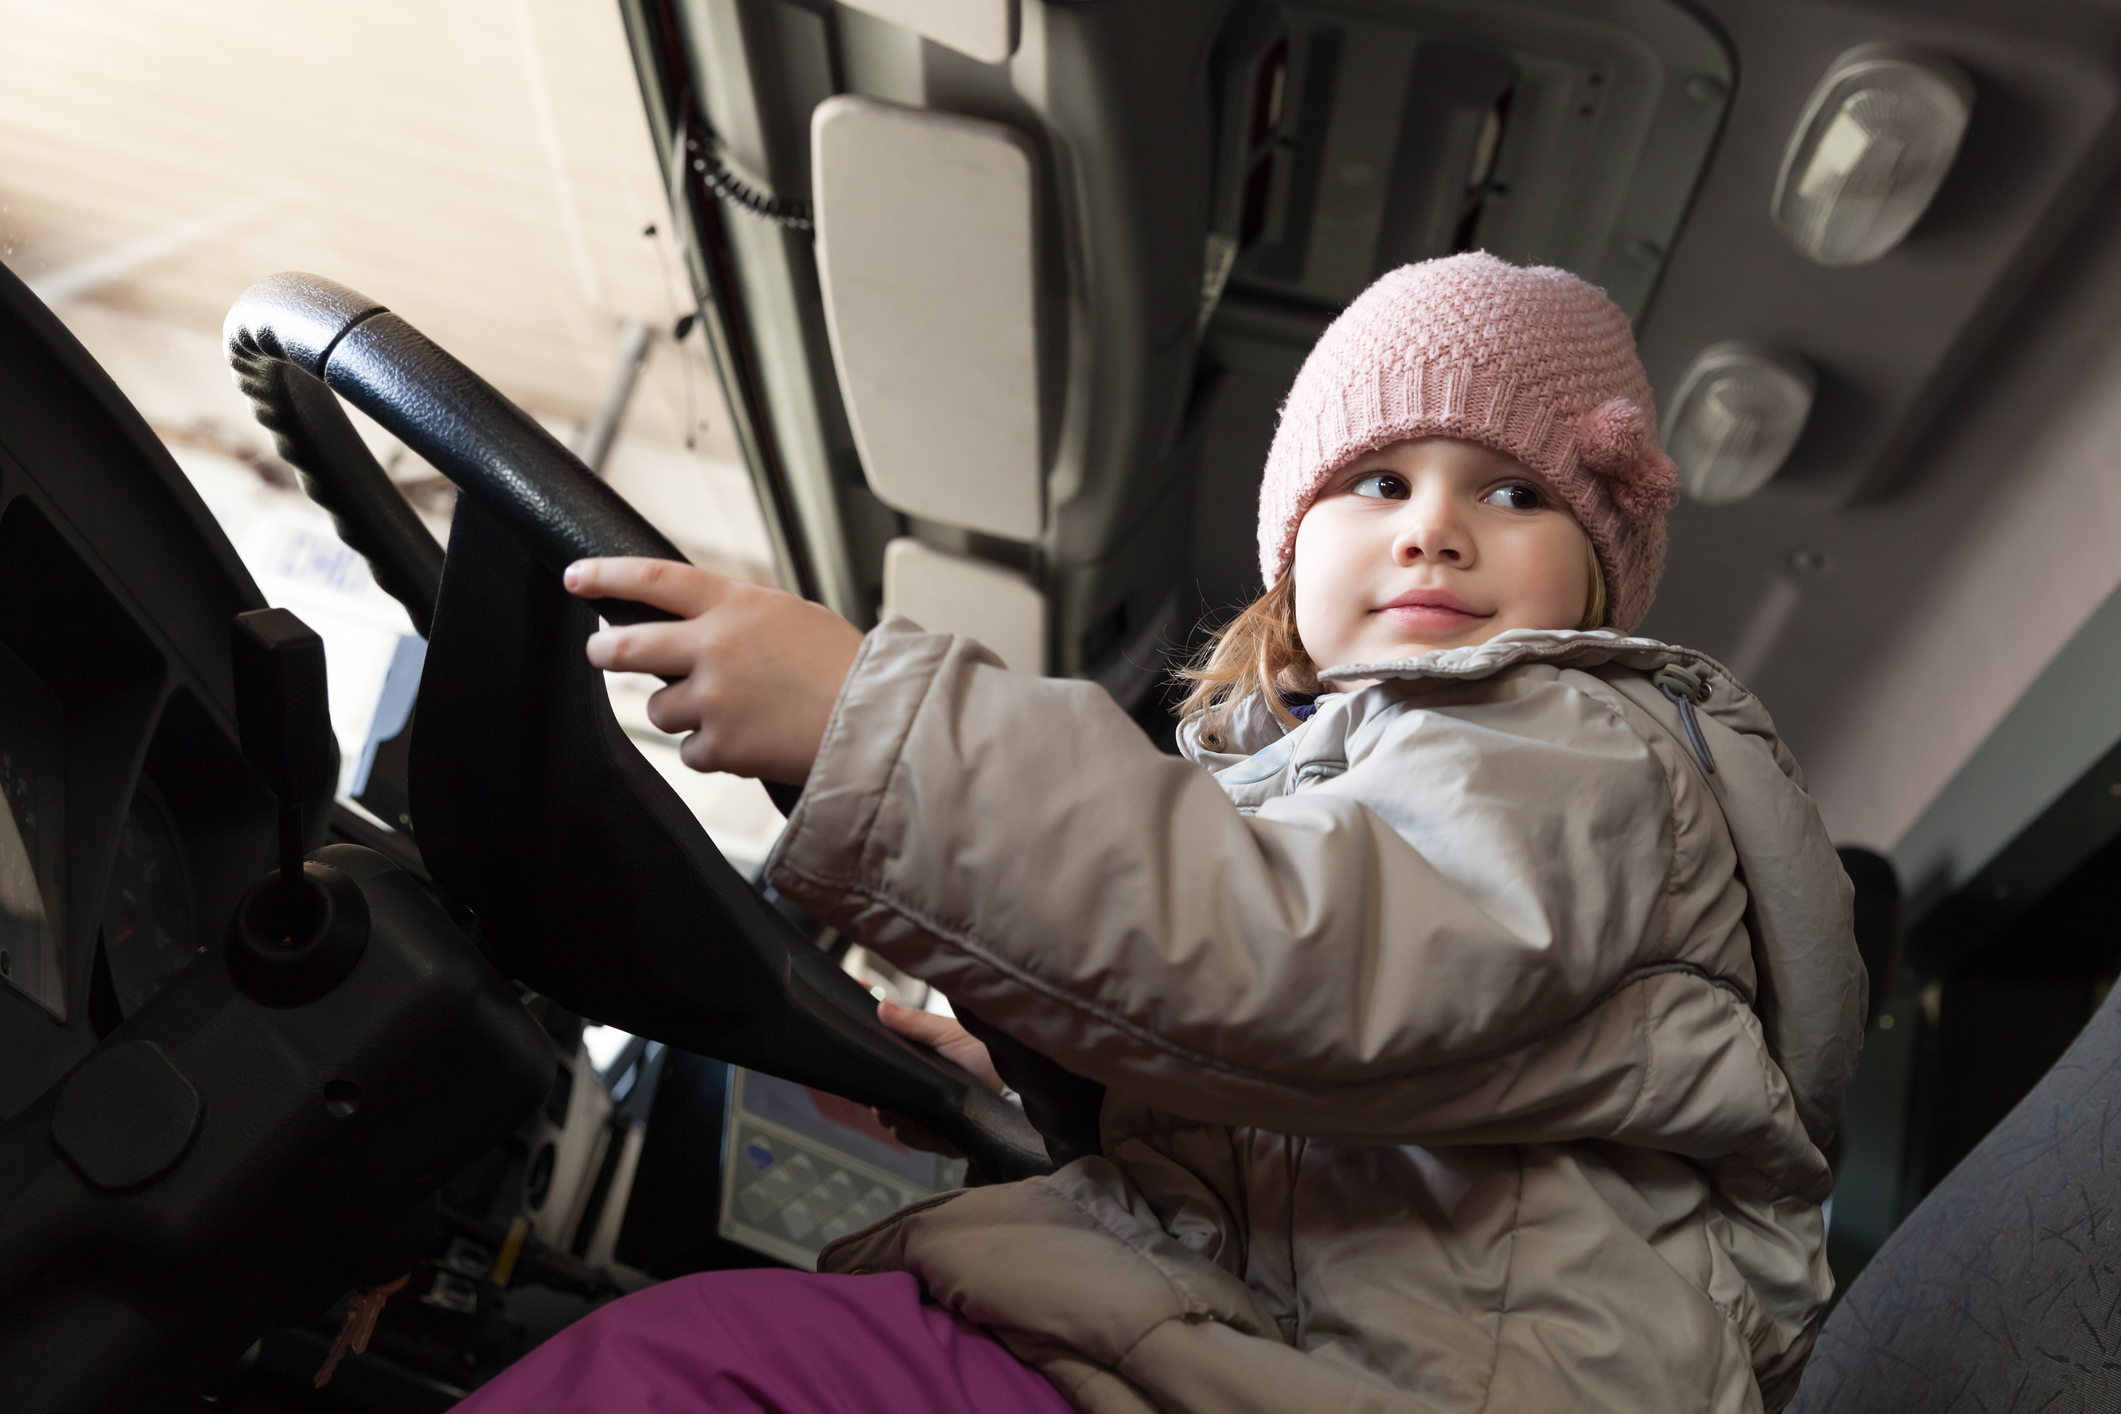 Kids can explore the exciting world of trucks in Riverhead this weekend on the North Fork